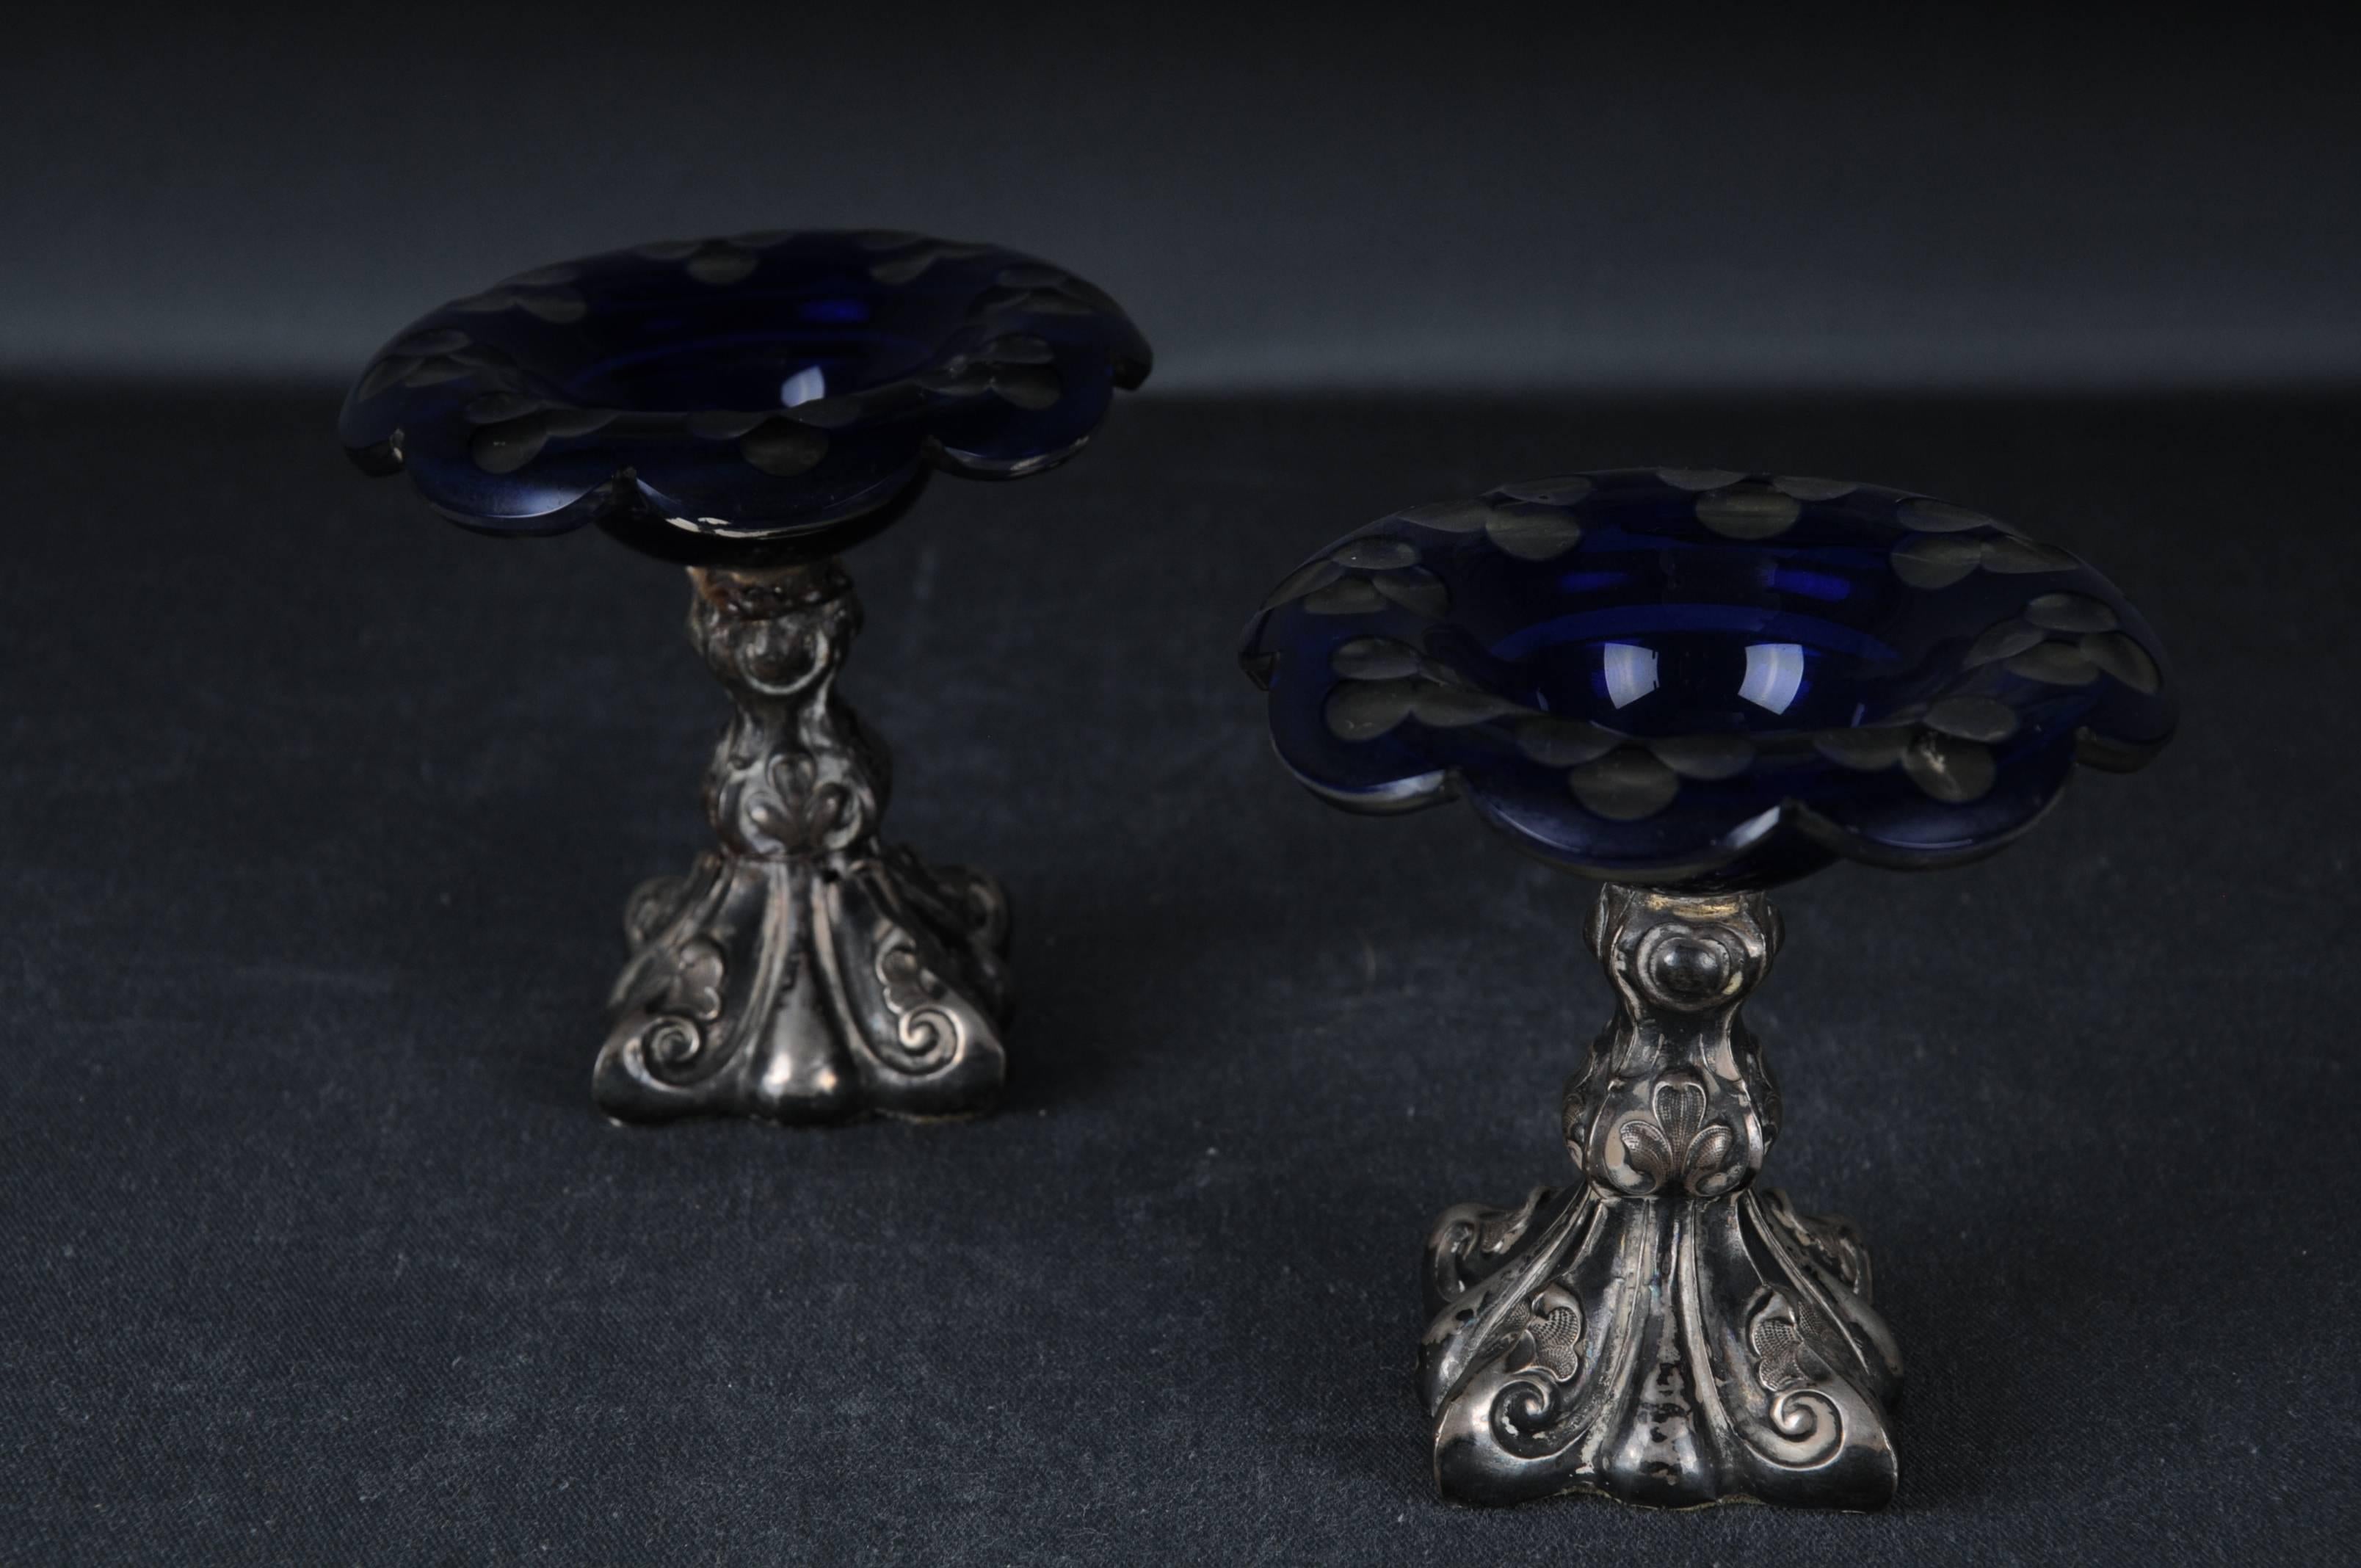 2 Antique Silver Caviar Footbowls 
Biedermeier Germany 

Bowls with blue glass

The Bowls is weighted
Weight: 292 grams

The condition can be seen in the pictures.